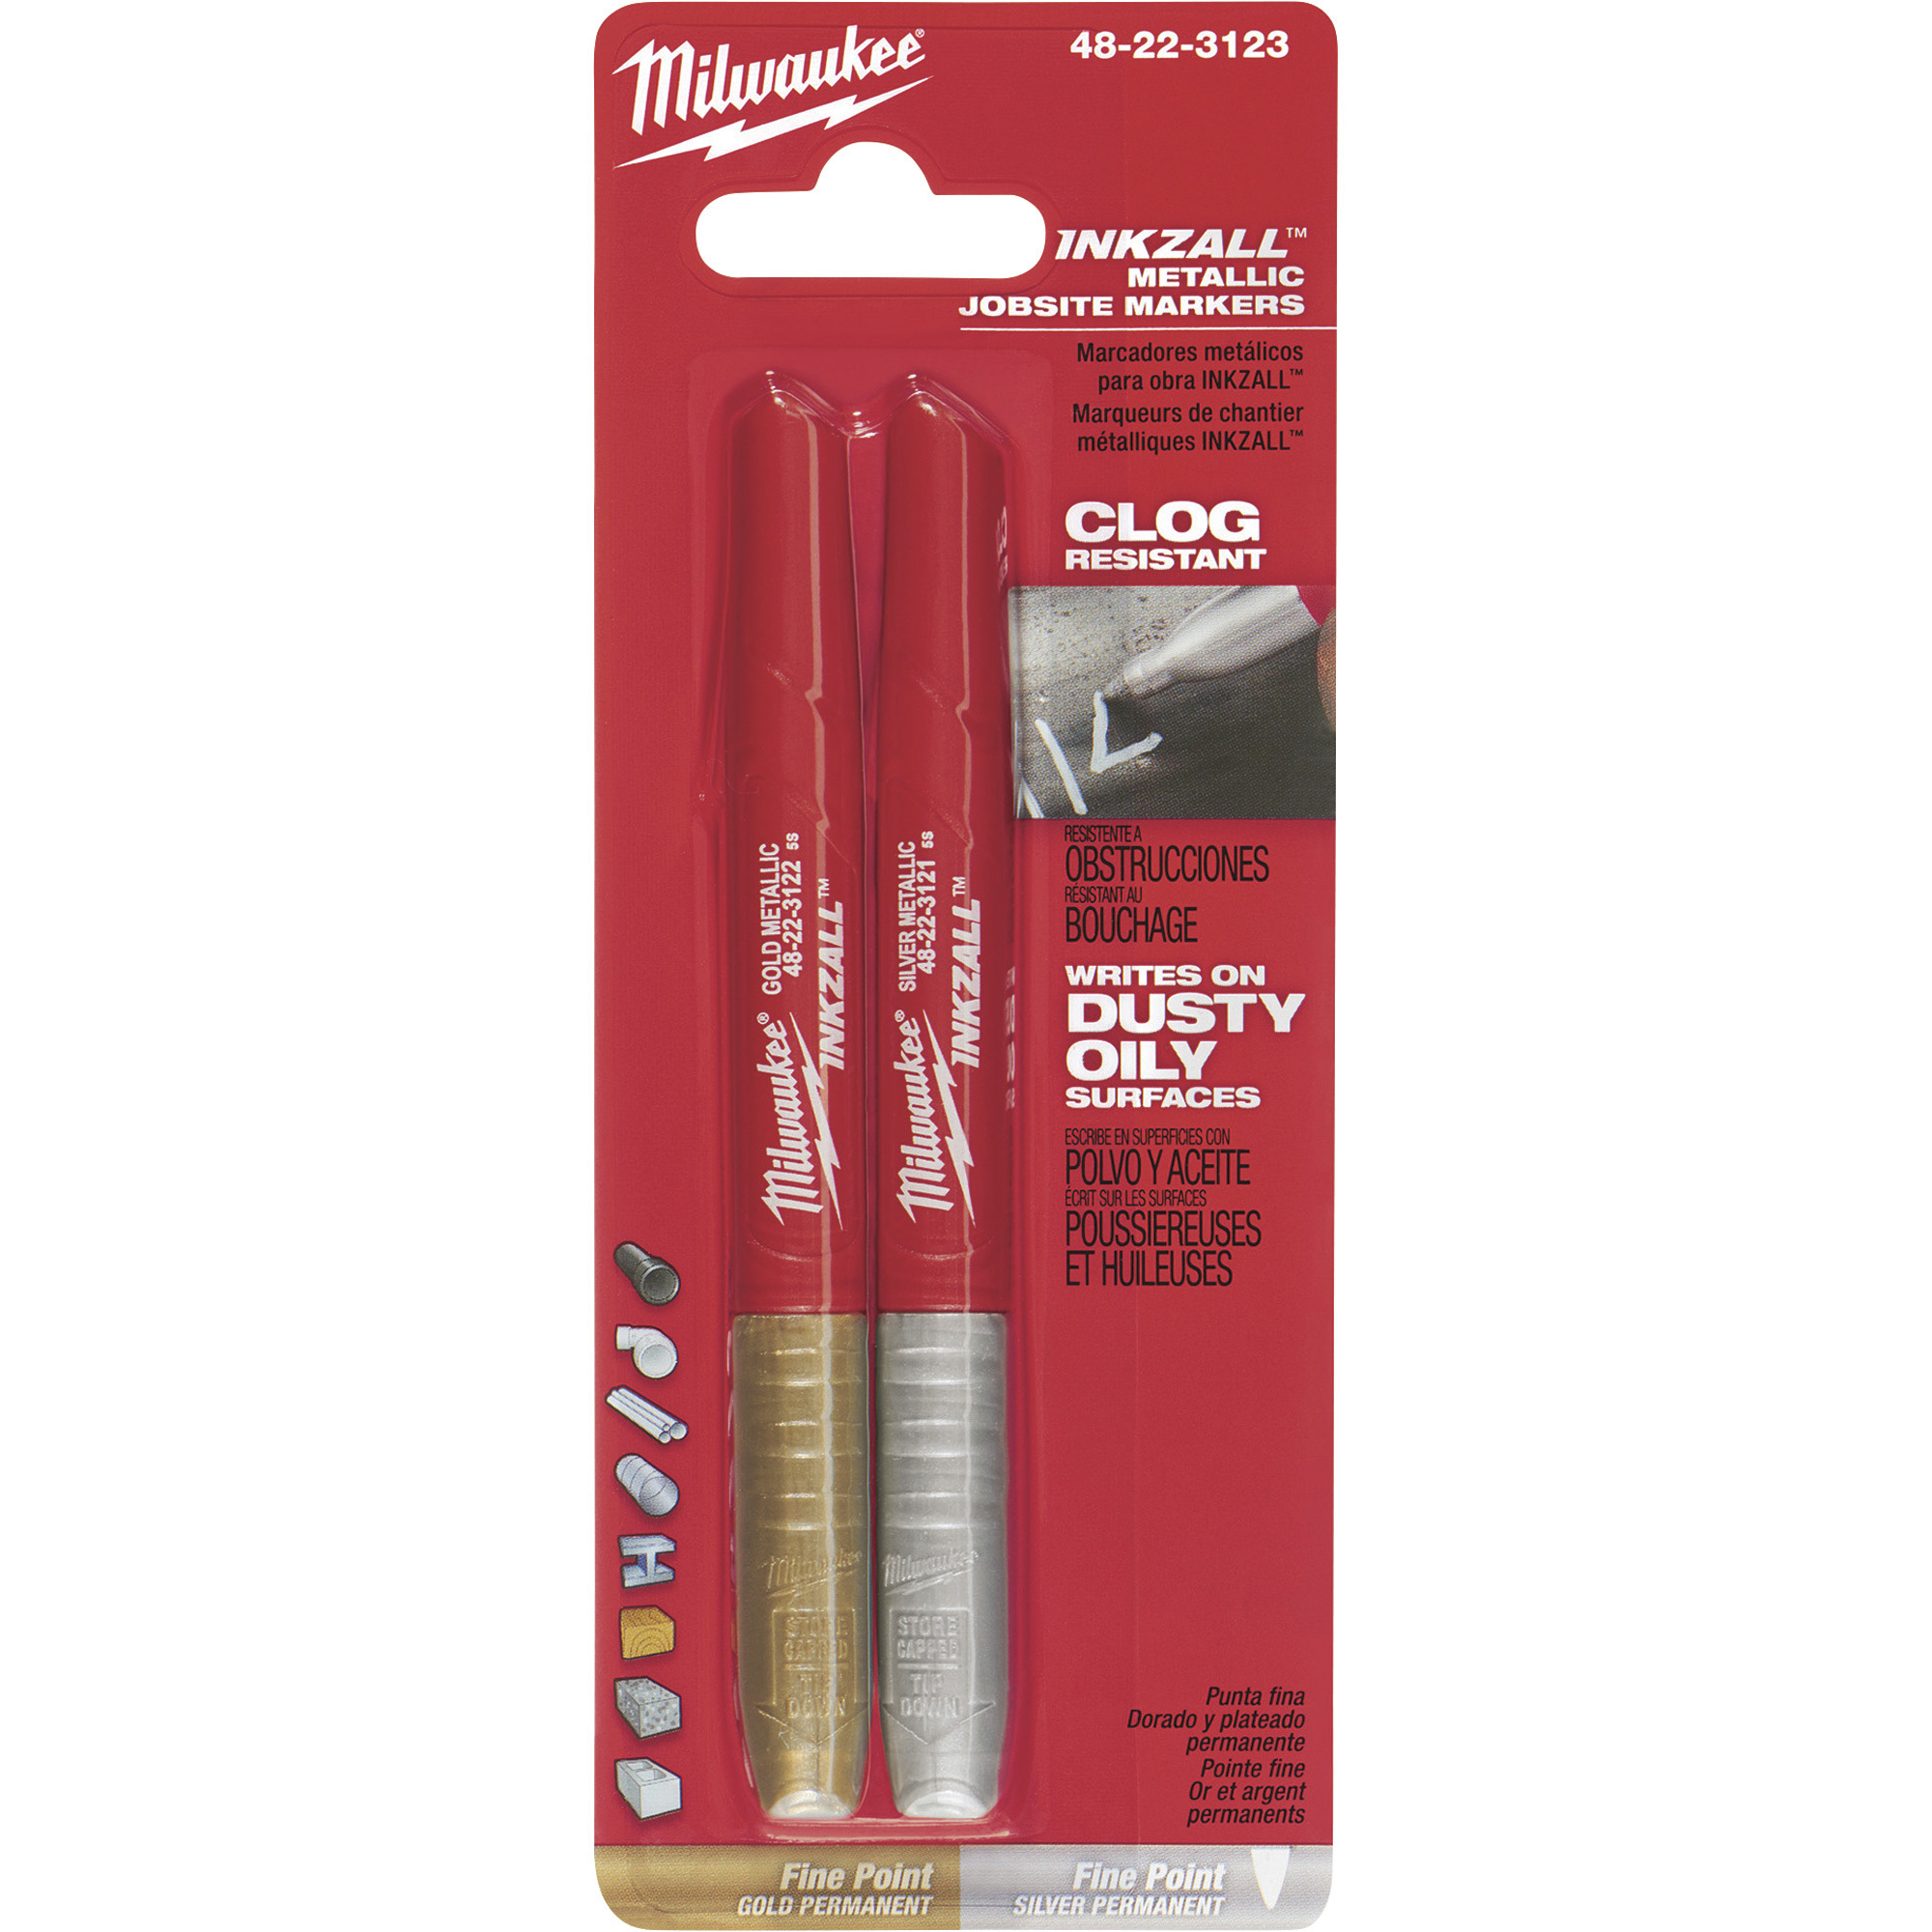 Milwaukee Inkzall Fine Point Markers — 2-Pk., Silver/Gold, Model